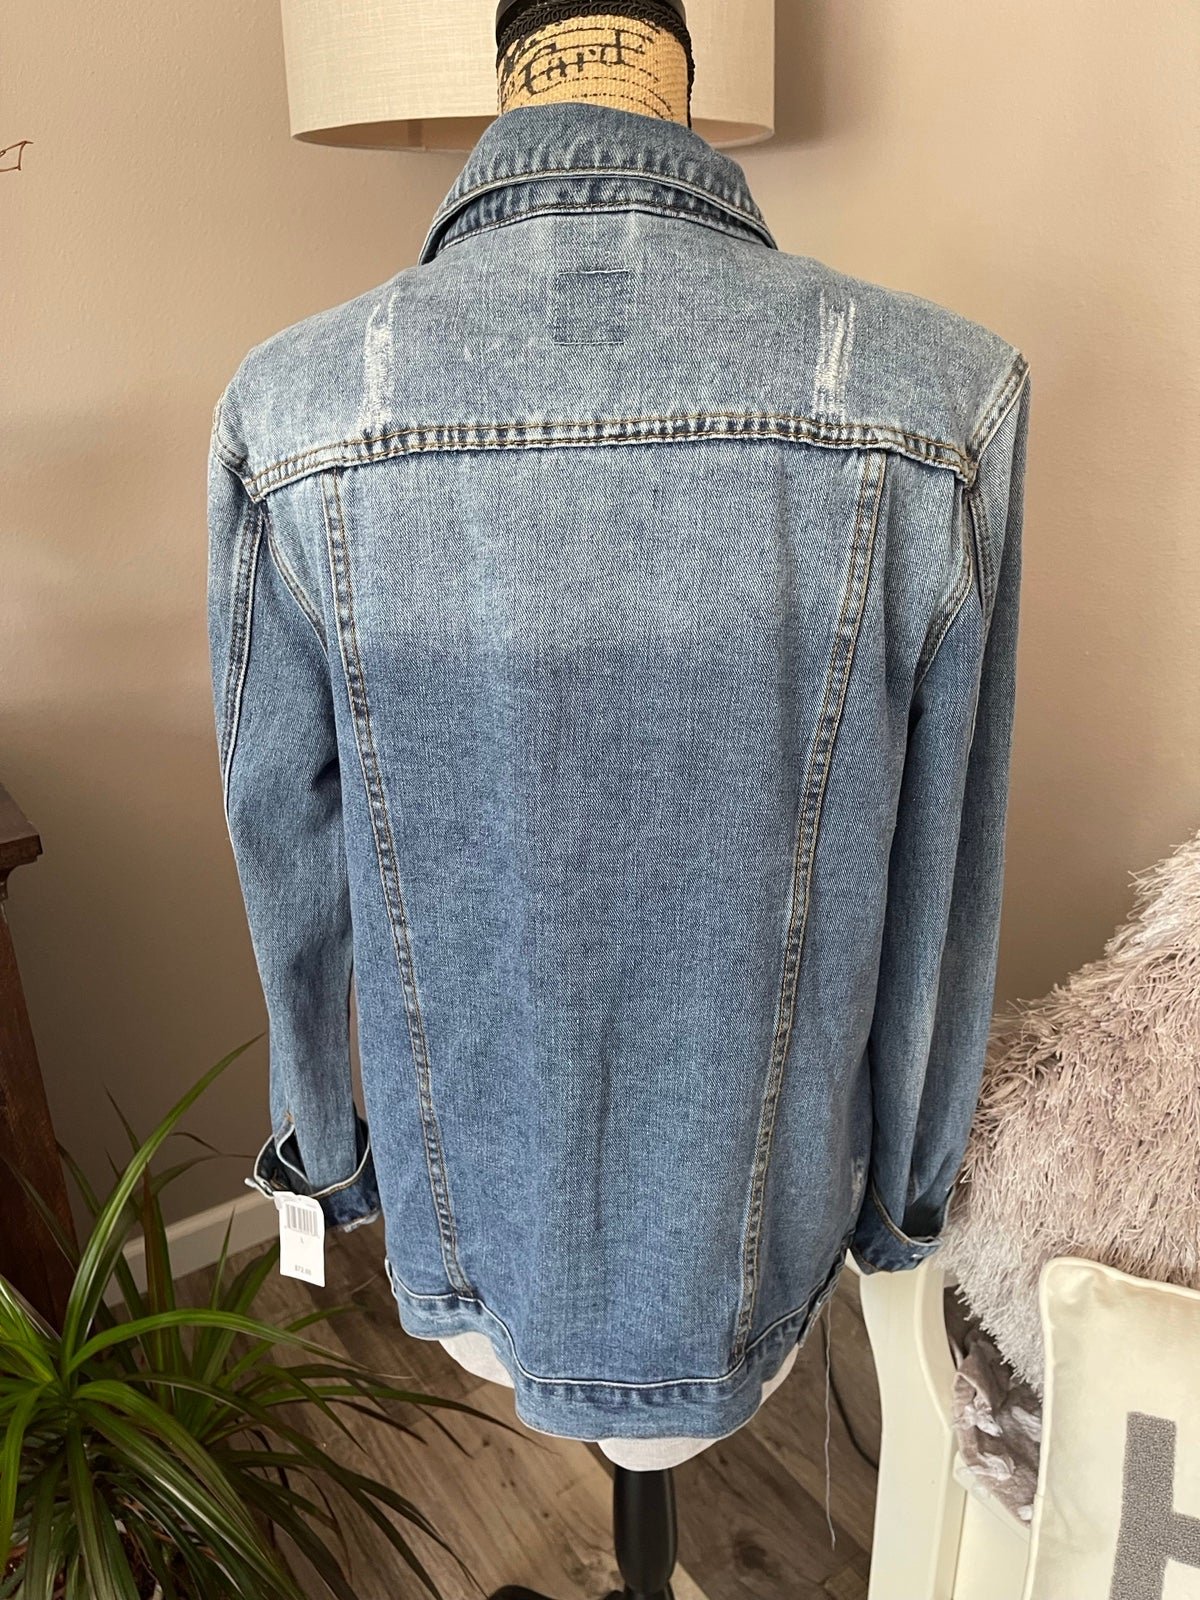 cheapest place to buy  Stylish embroidered Jean Jacket! PCRb3DxGB US Sale